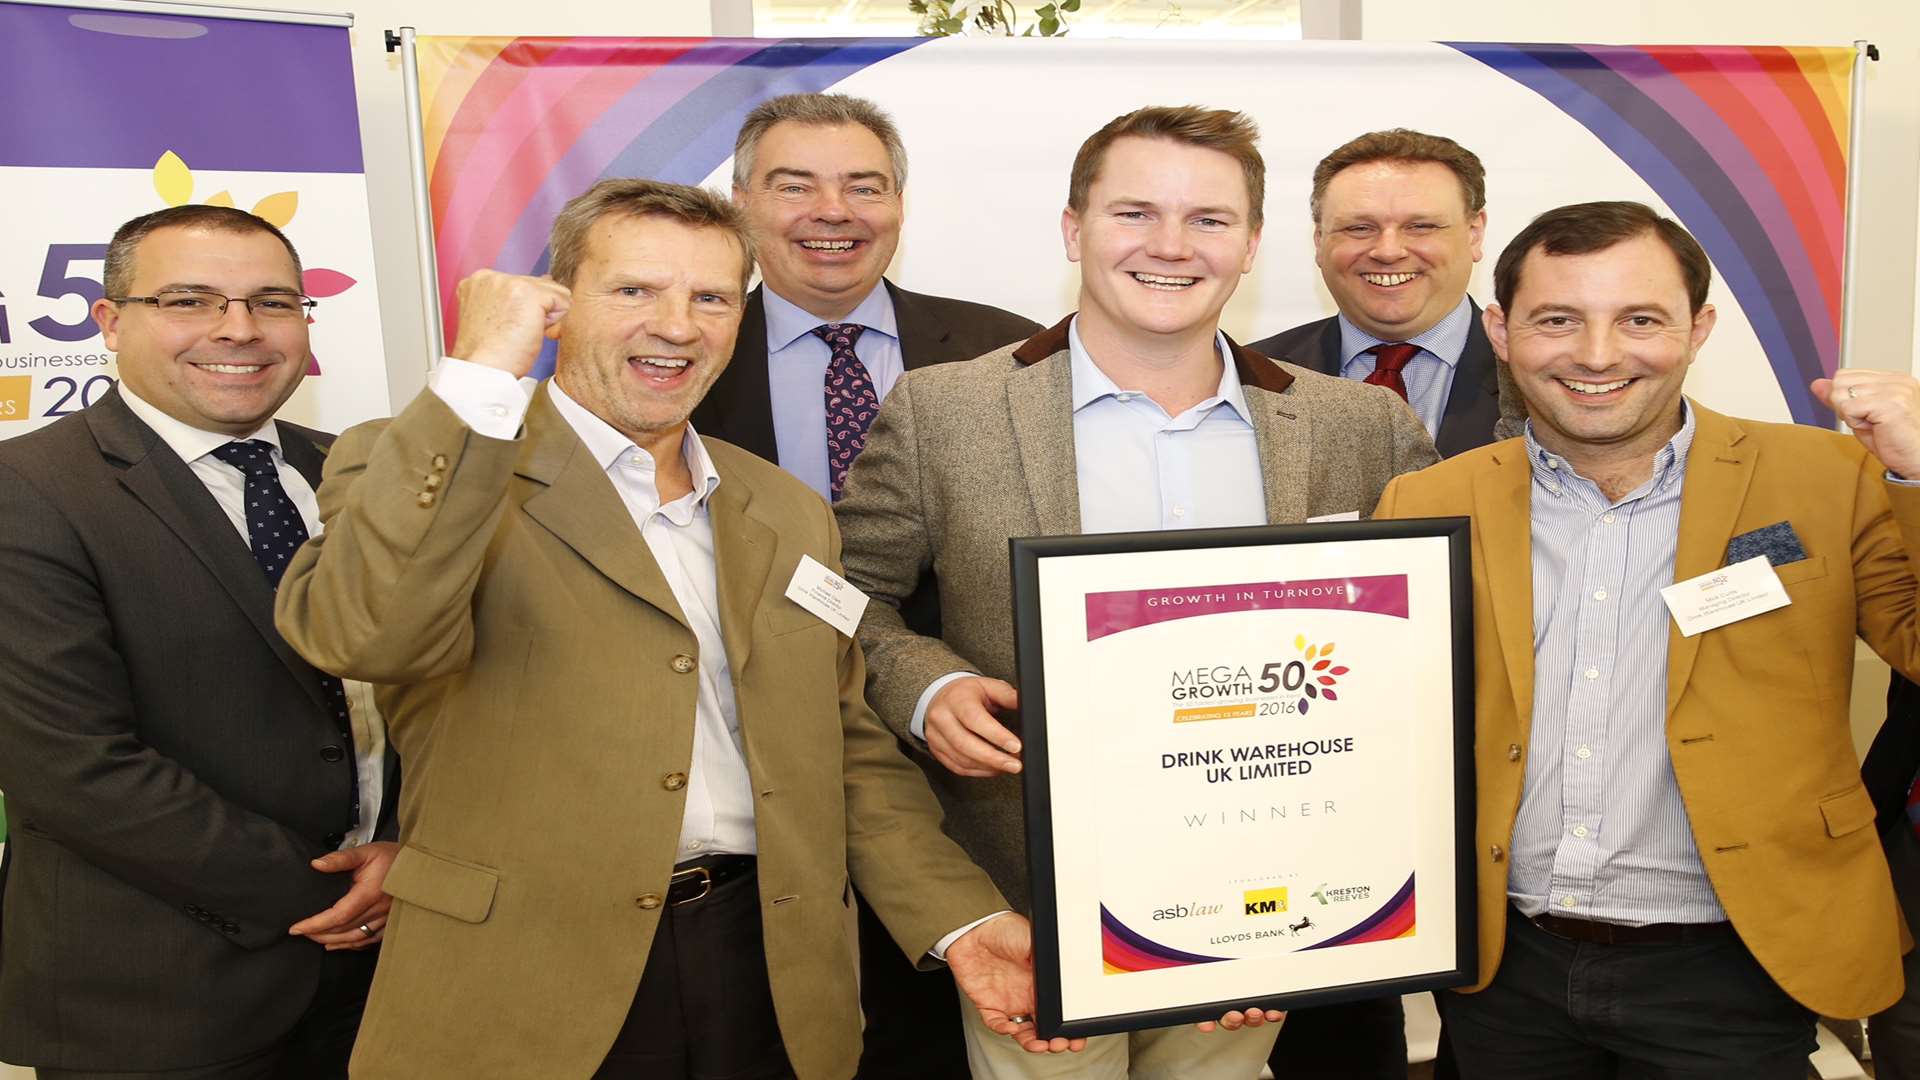 Drinks Warehouse UK took top spot at MegaGrowth 50 2016, from left, Peter Milcoy of Lloyds Bank, Mike Clark of Drink Warehouse, Andrew Griggs of Kreston Reeves, Demis Farley of Drink Warehouse, Richard Elliot of KM Group and Mick Curtis of Drink Warehouse